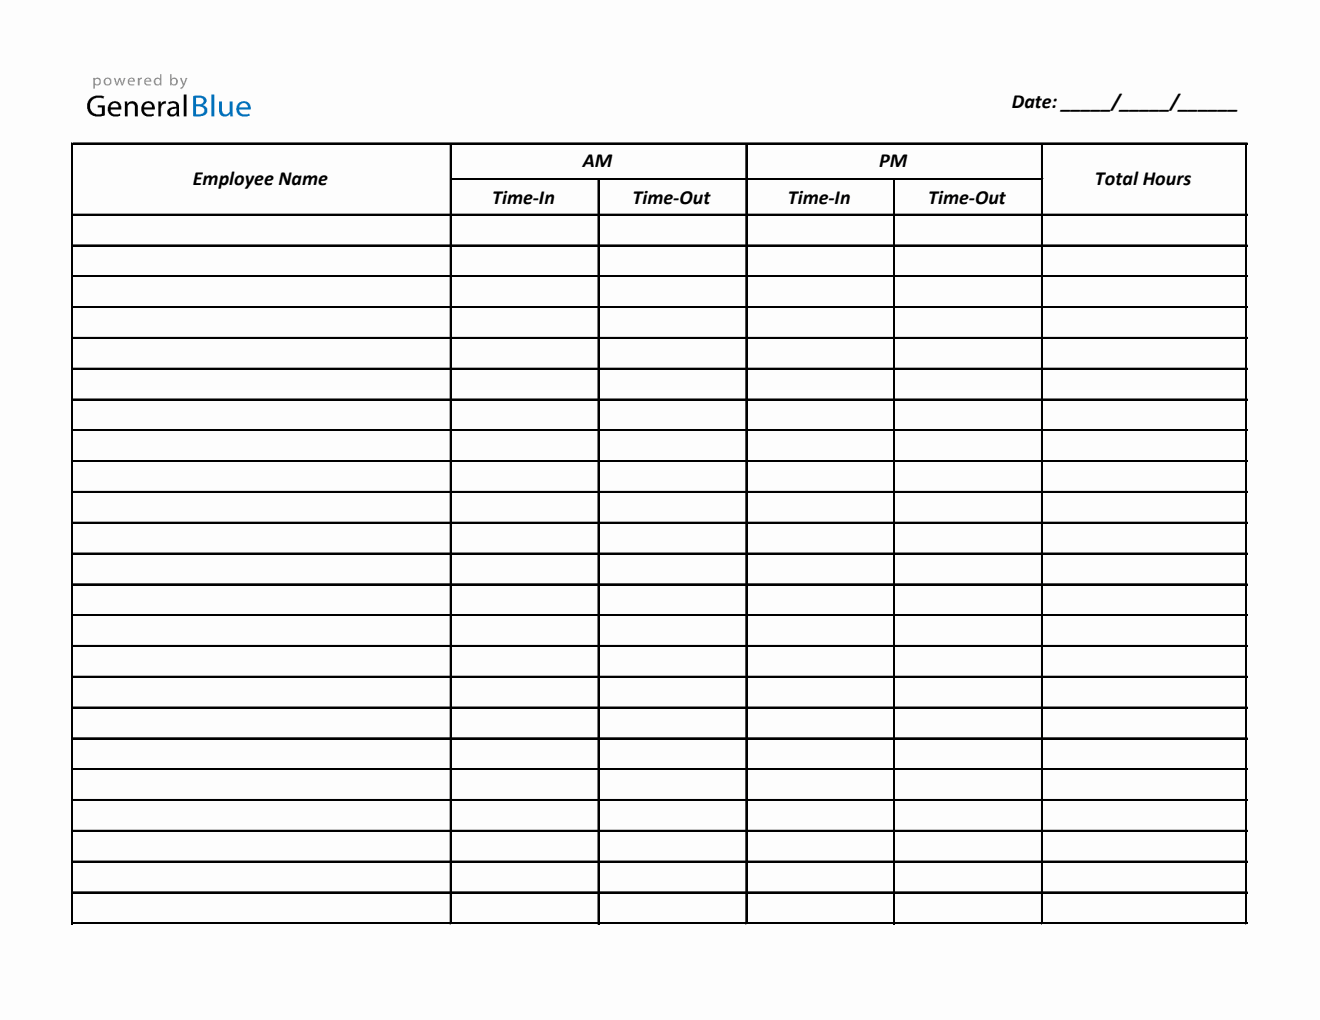 Printable Time-in and Time-Out Timesheet (Excel, Letter)